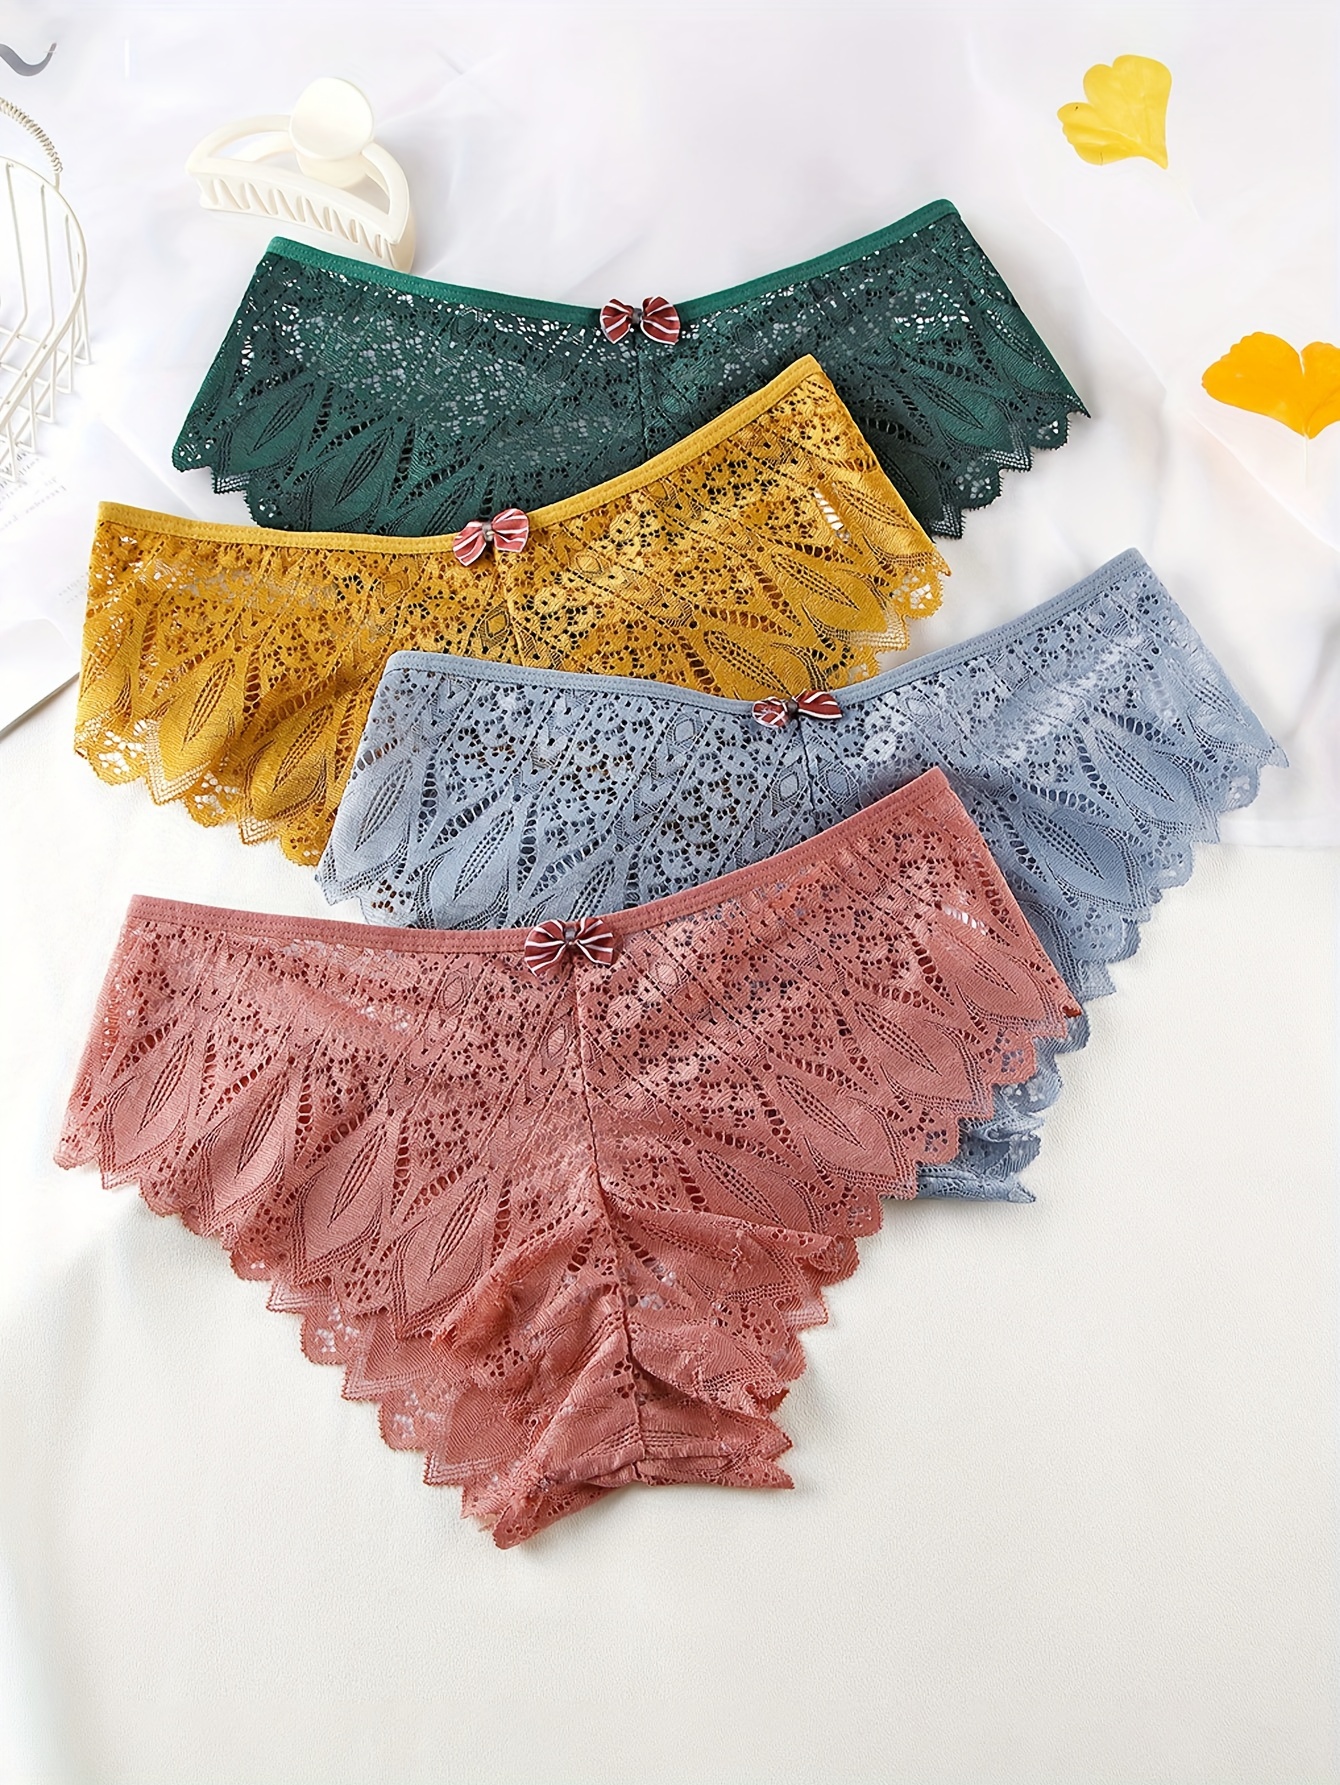 Sexy Women Lingerie Panties Lace Hipster Thong Cheeky Underwear